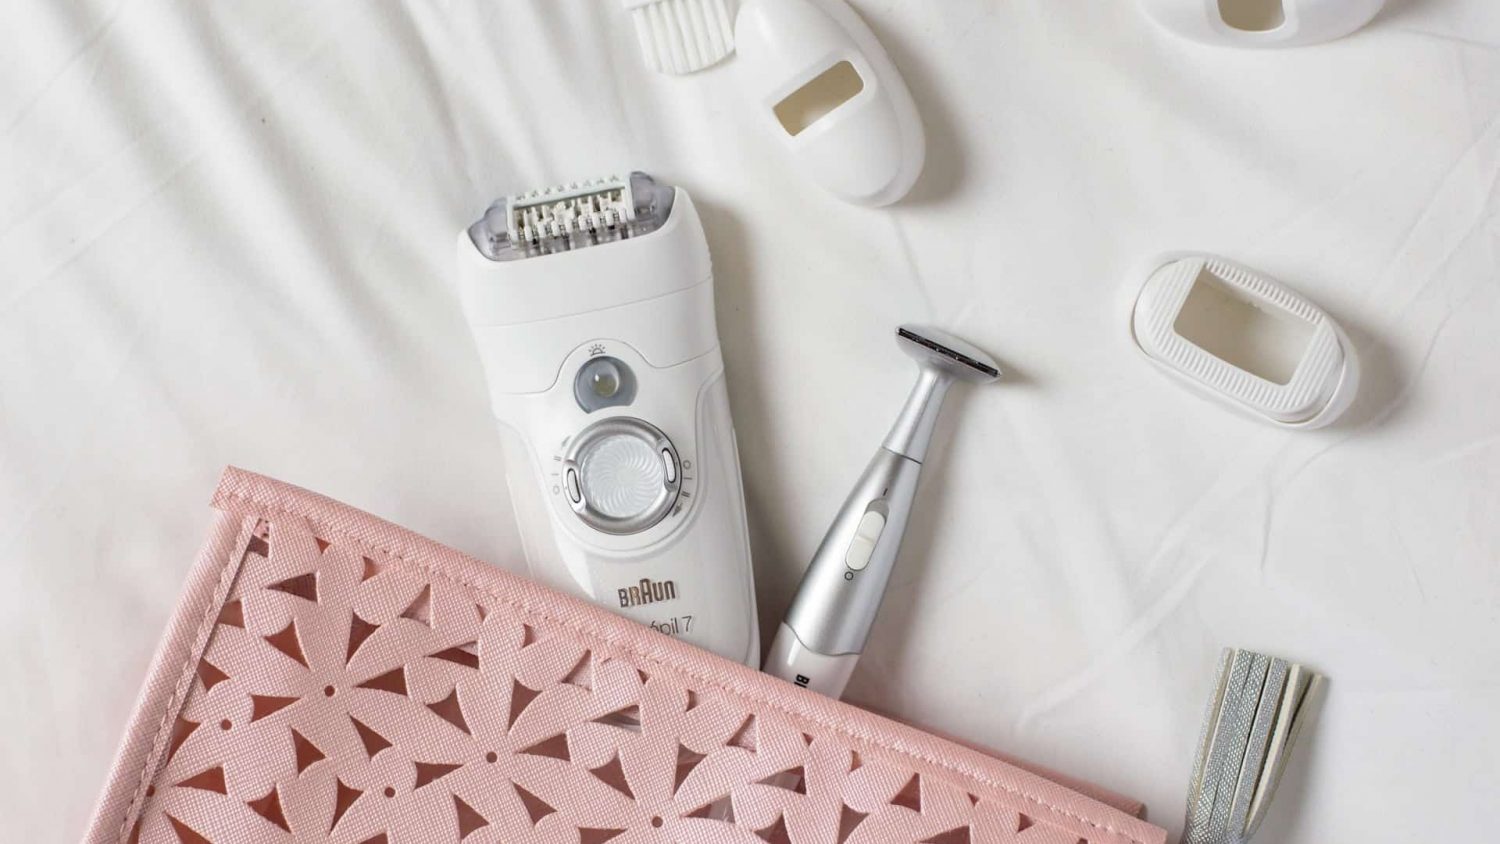 Best Facial Epilator – 6 Tools for Soft and Smooth Skin